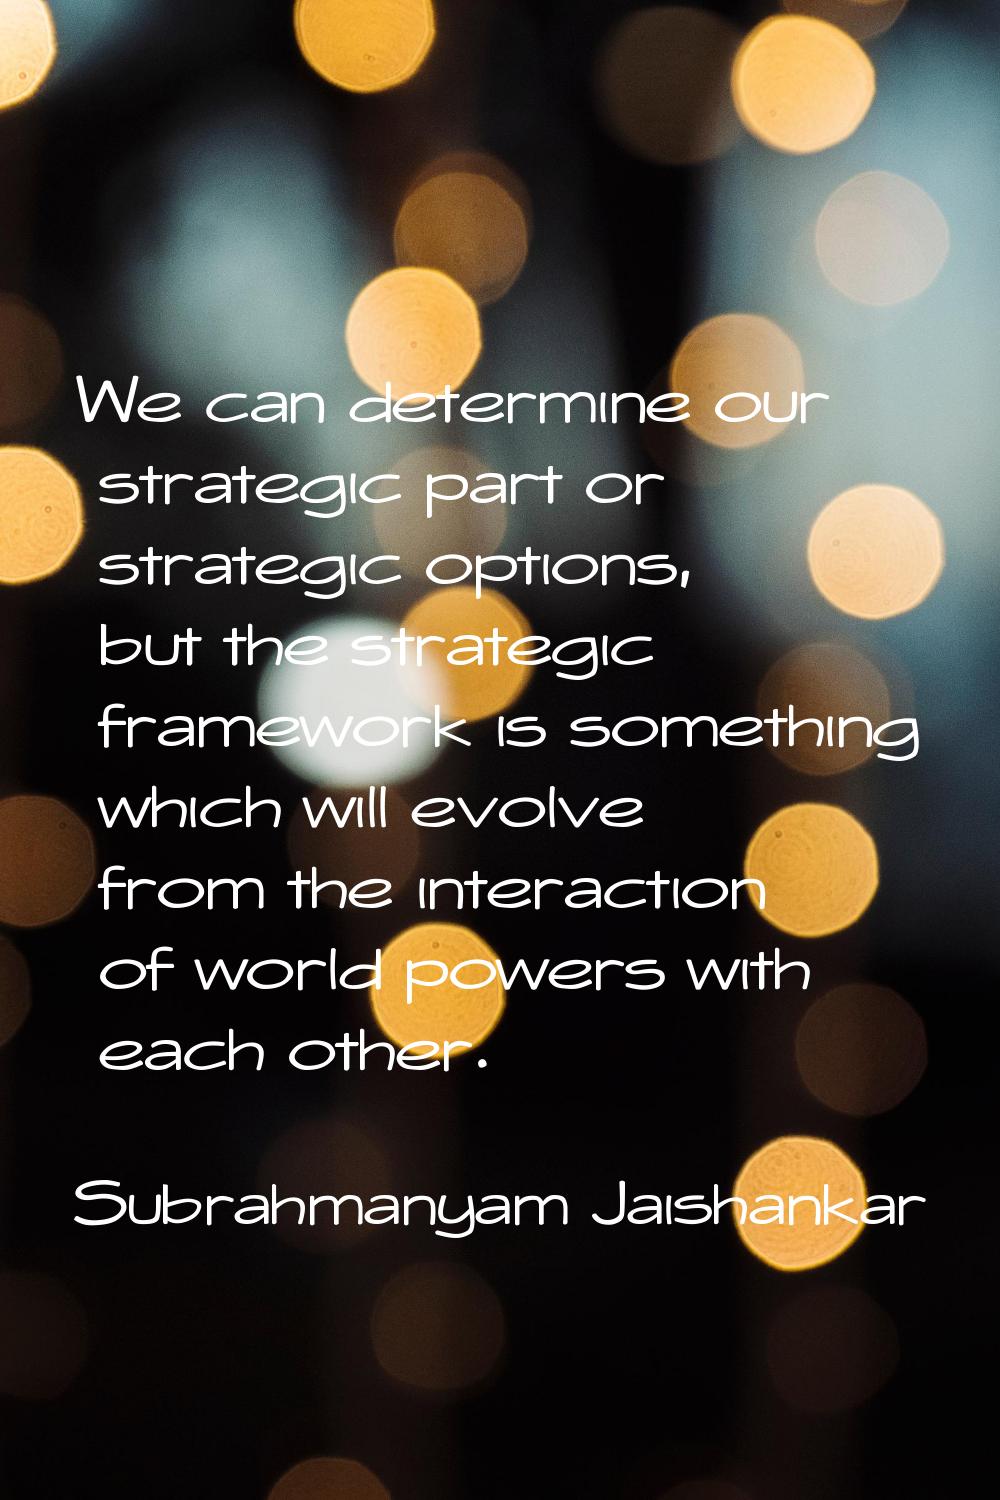 We can determine our strategic part or strategic options, but the strategic framework is something 